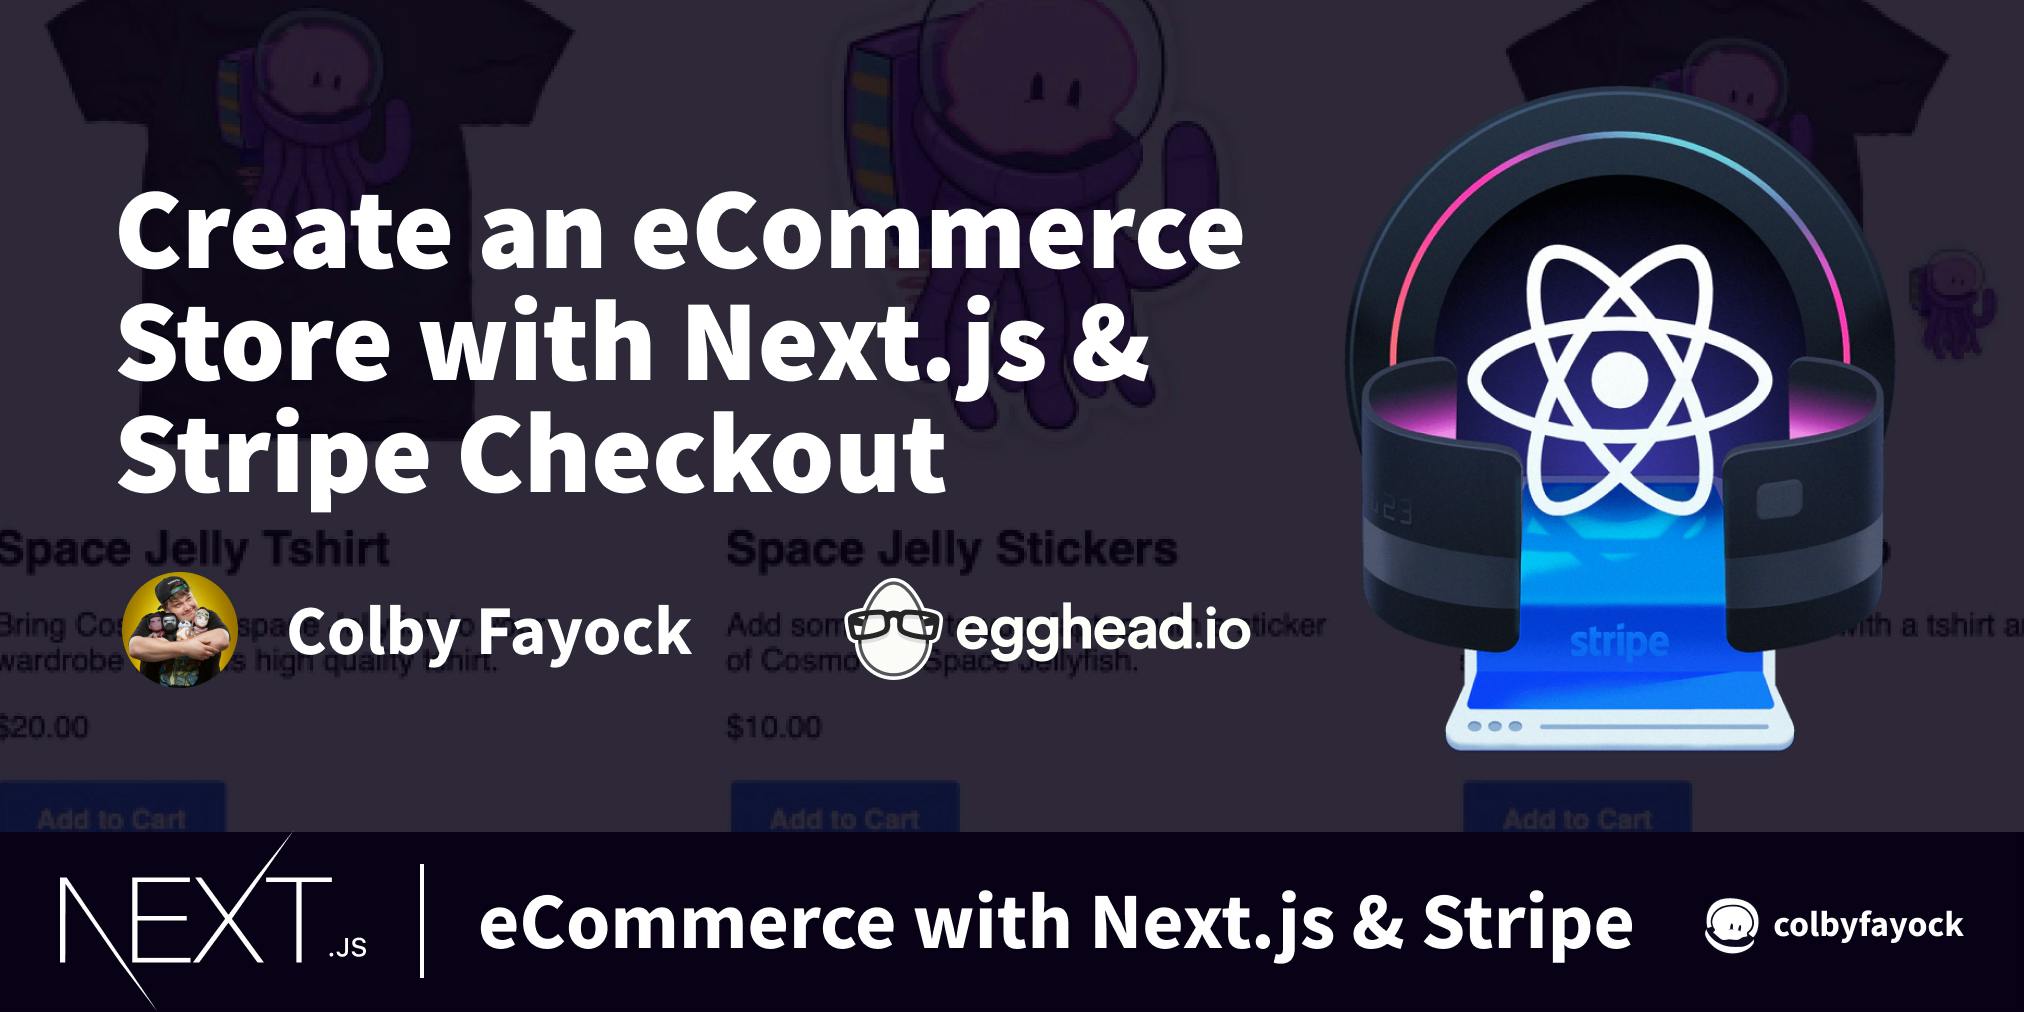 eCommerce with Next.js